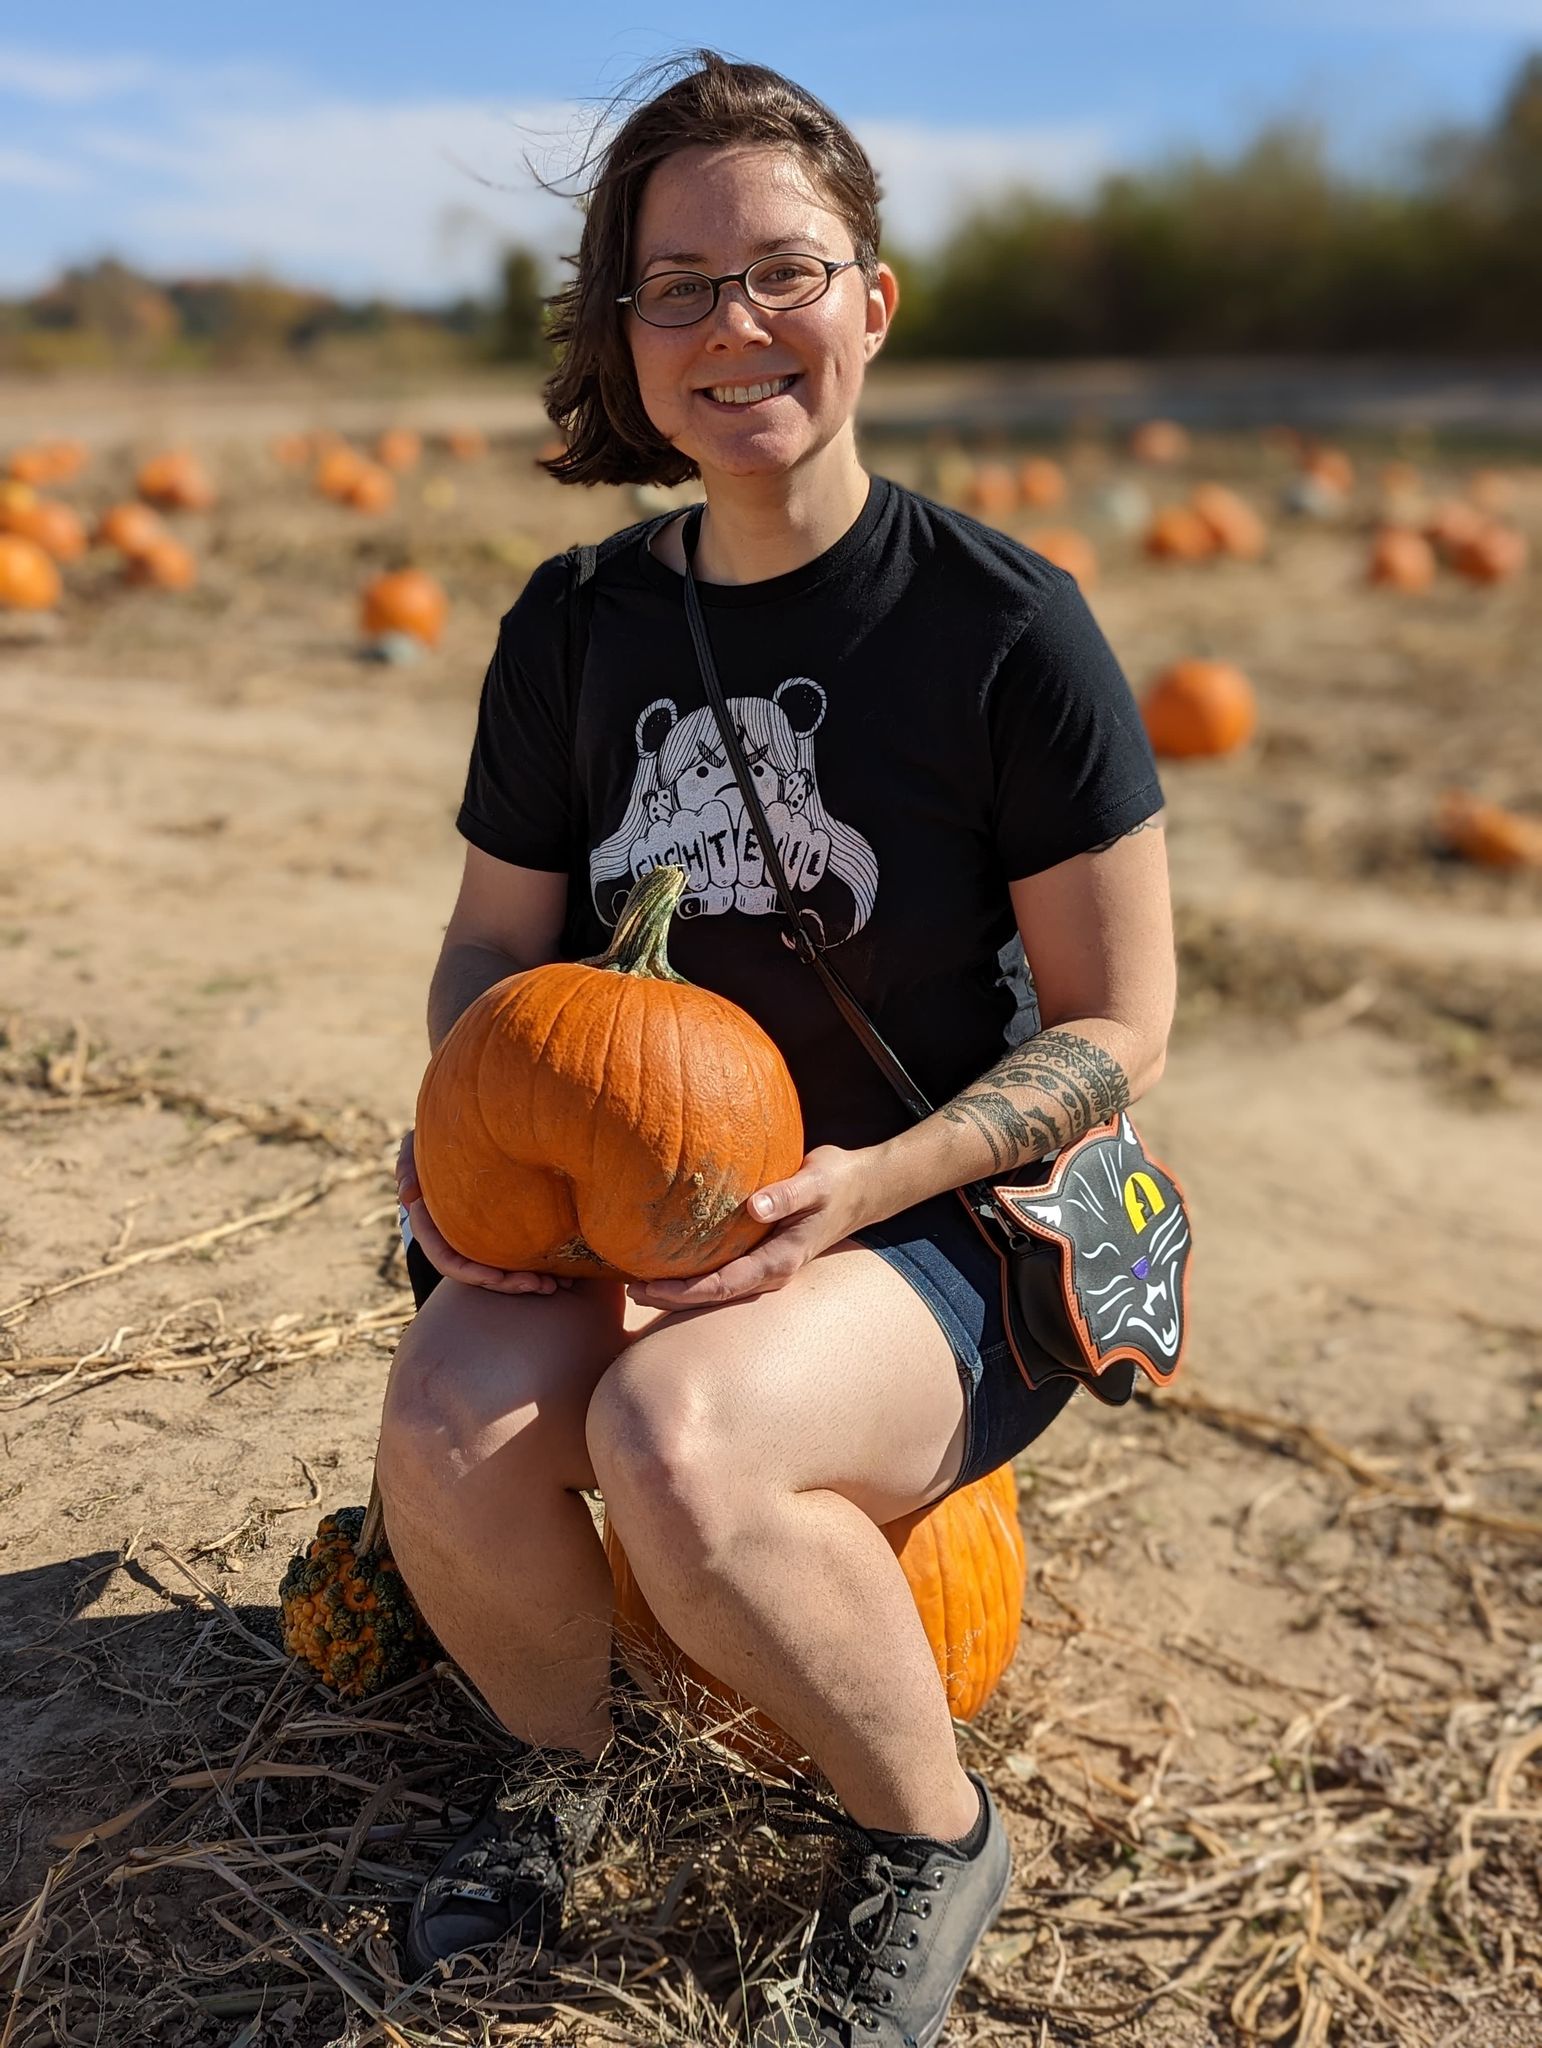 A white woman with windswept brown hair, sitting on a pumpkin in the middle of a pumpkin field. She is holding a pumpkin with a crevasse that makes it look like it has a butt or, arguably, like a character from Among Us. She looks immensely pleased.